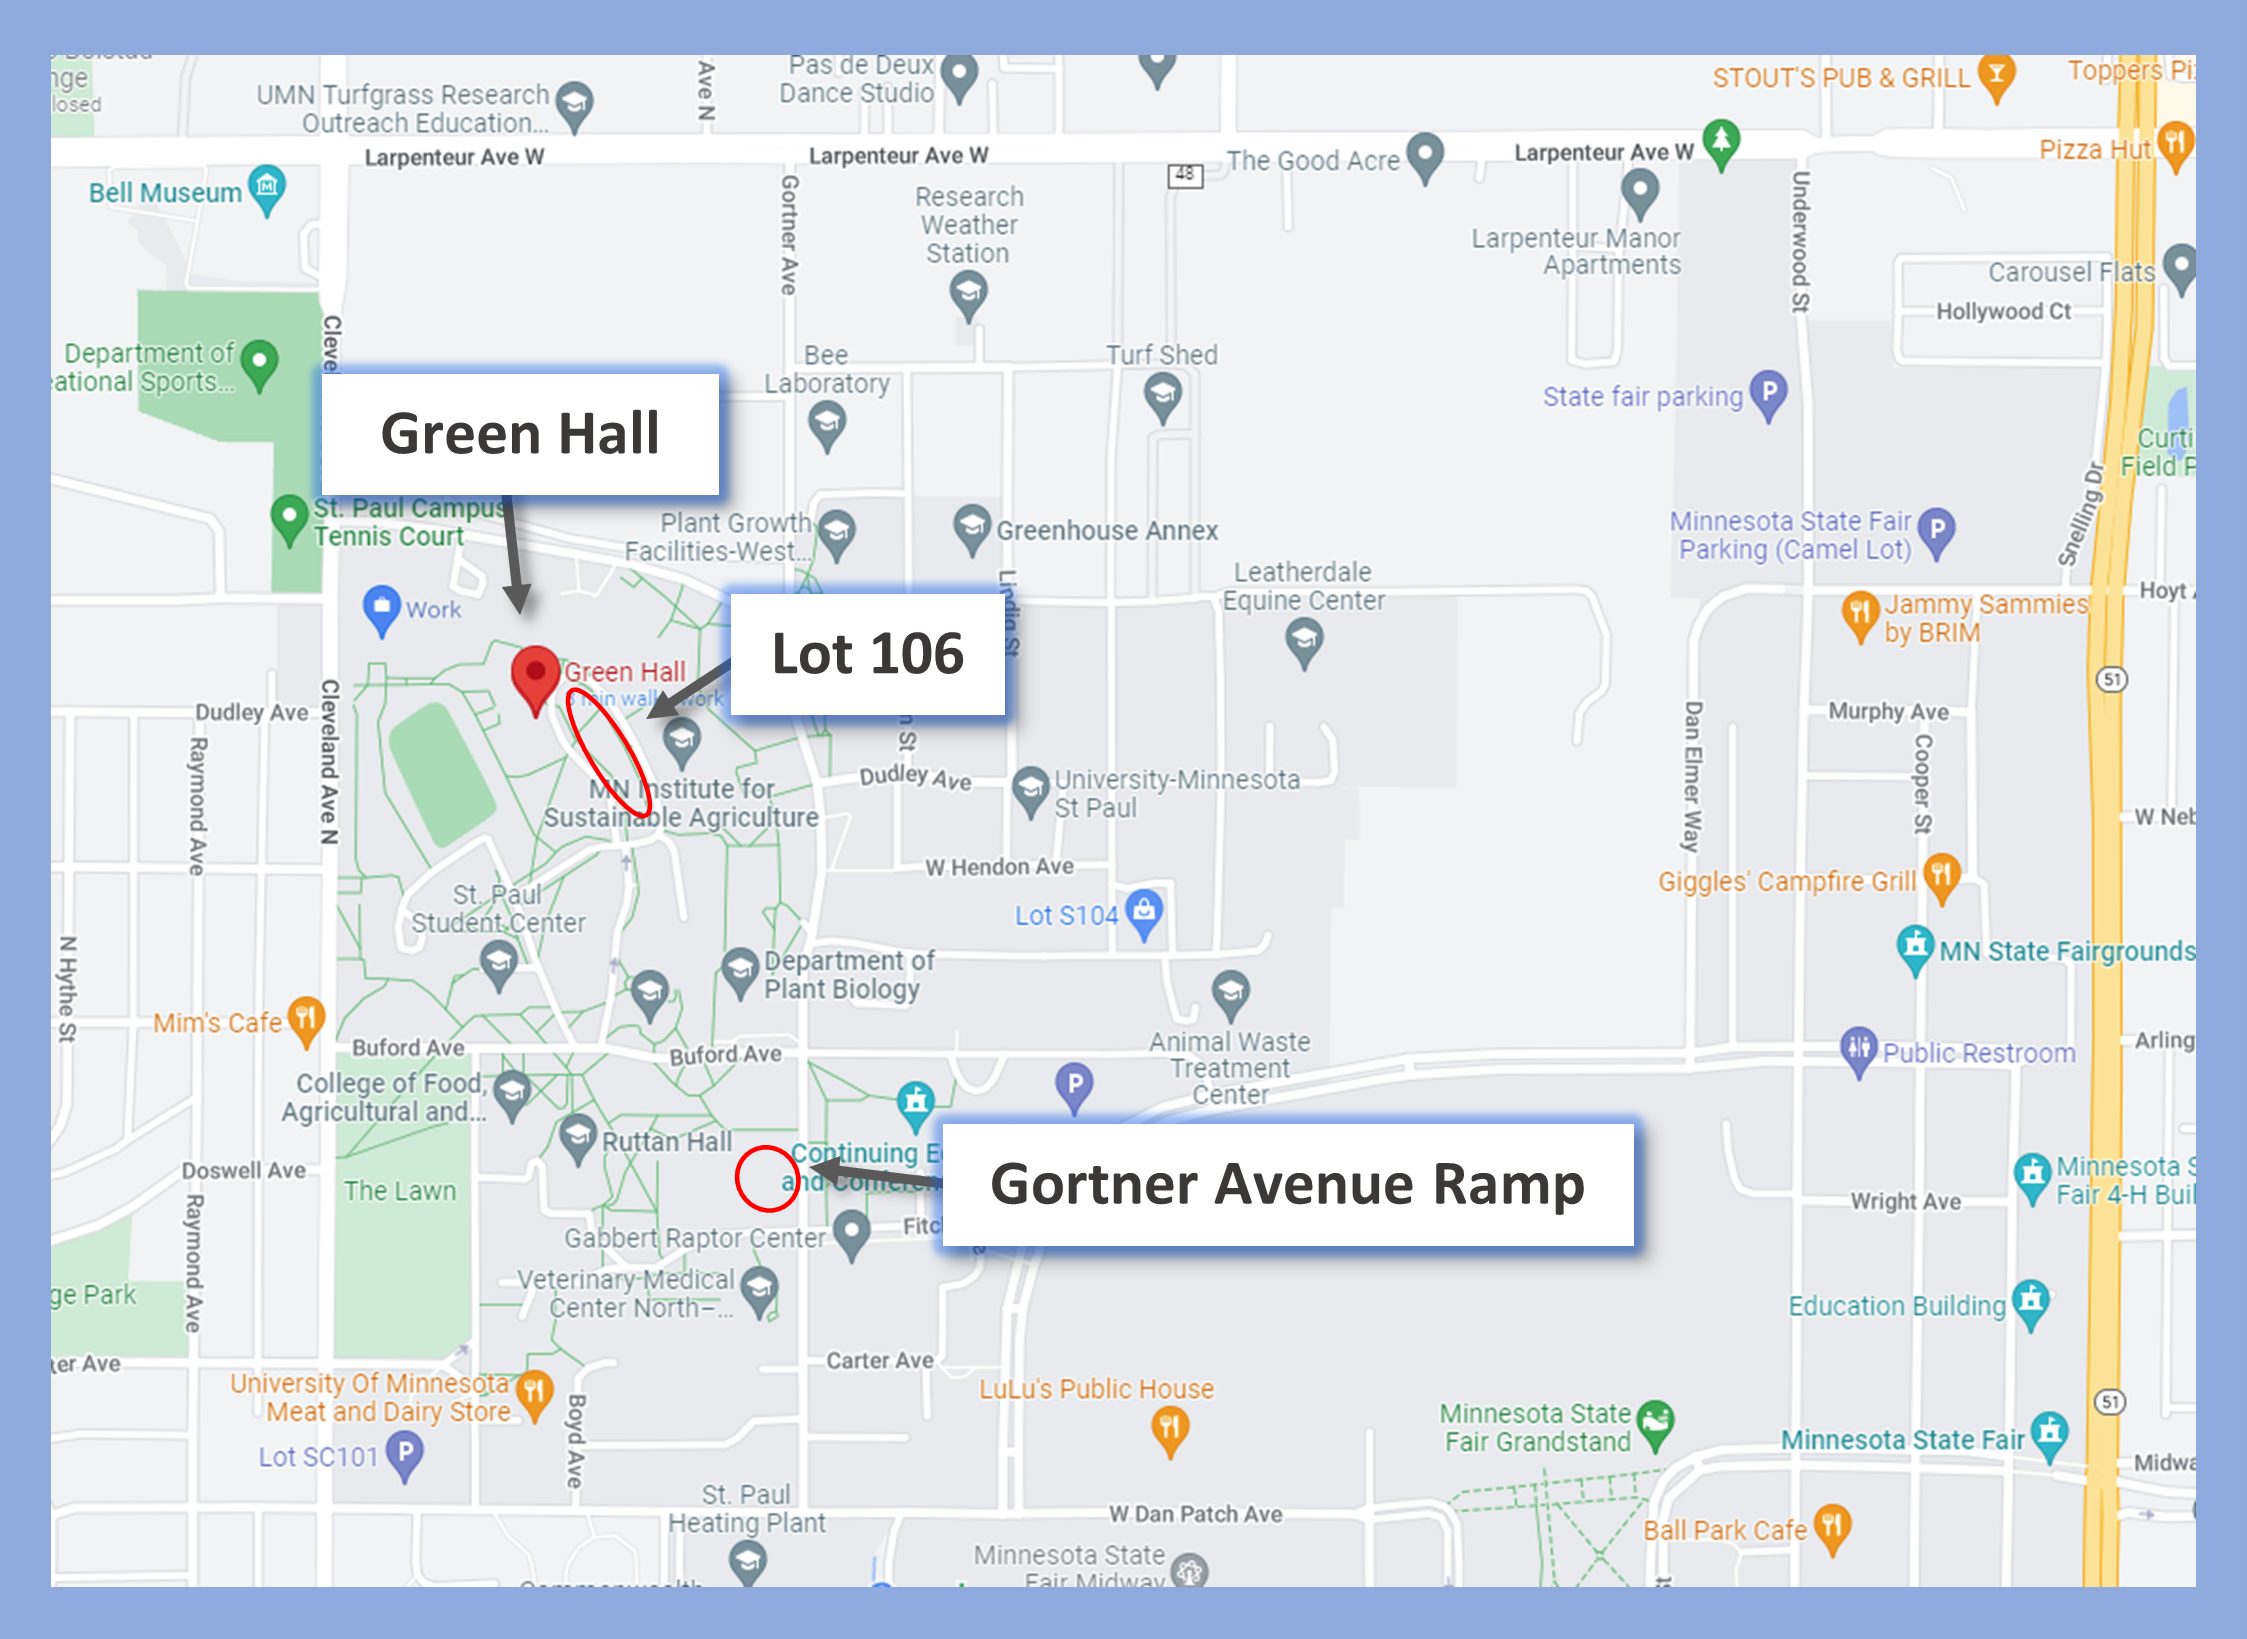 Parking and Green Hall location